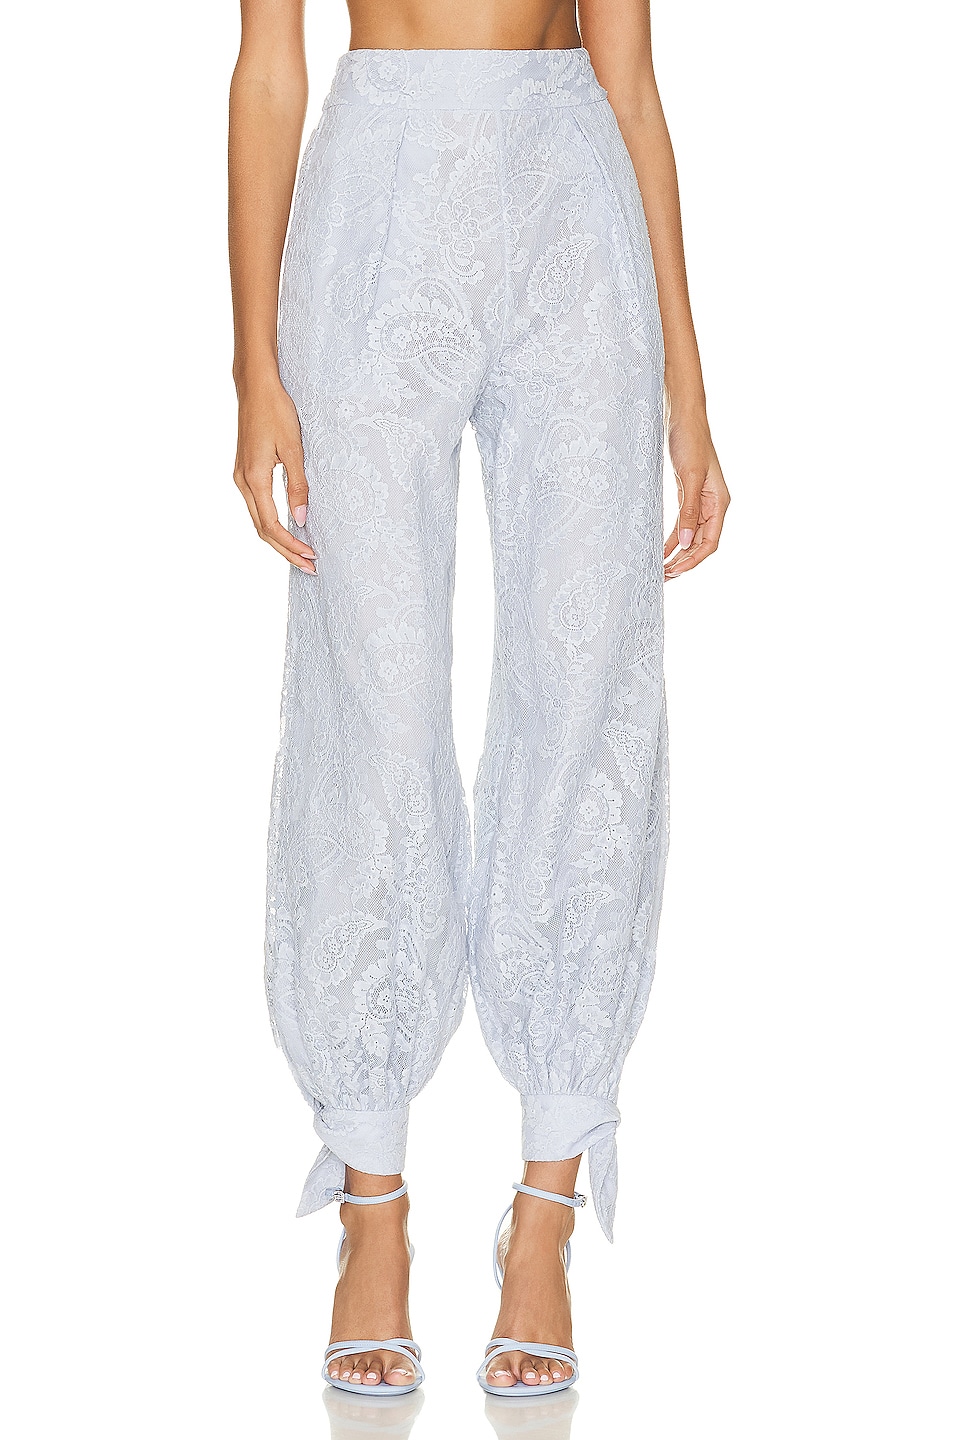 Image 1 of Zimmermann Coaster Lace Harem Pant in Periwinkle